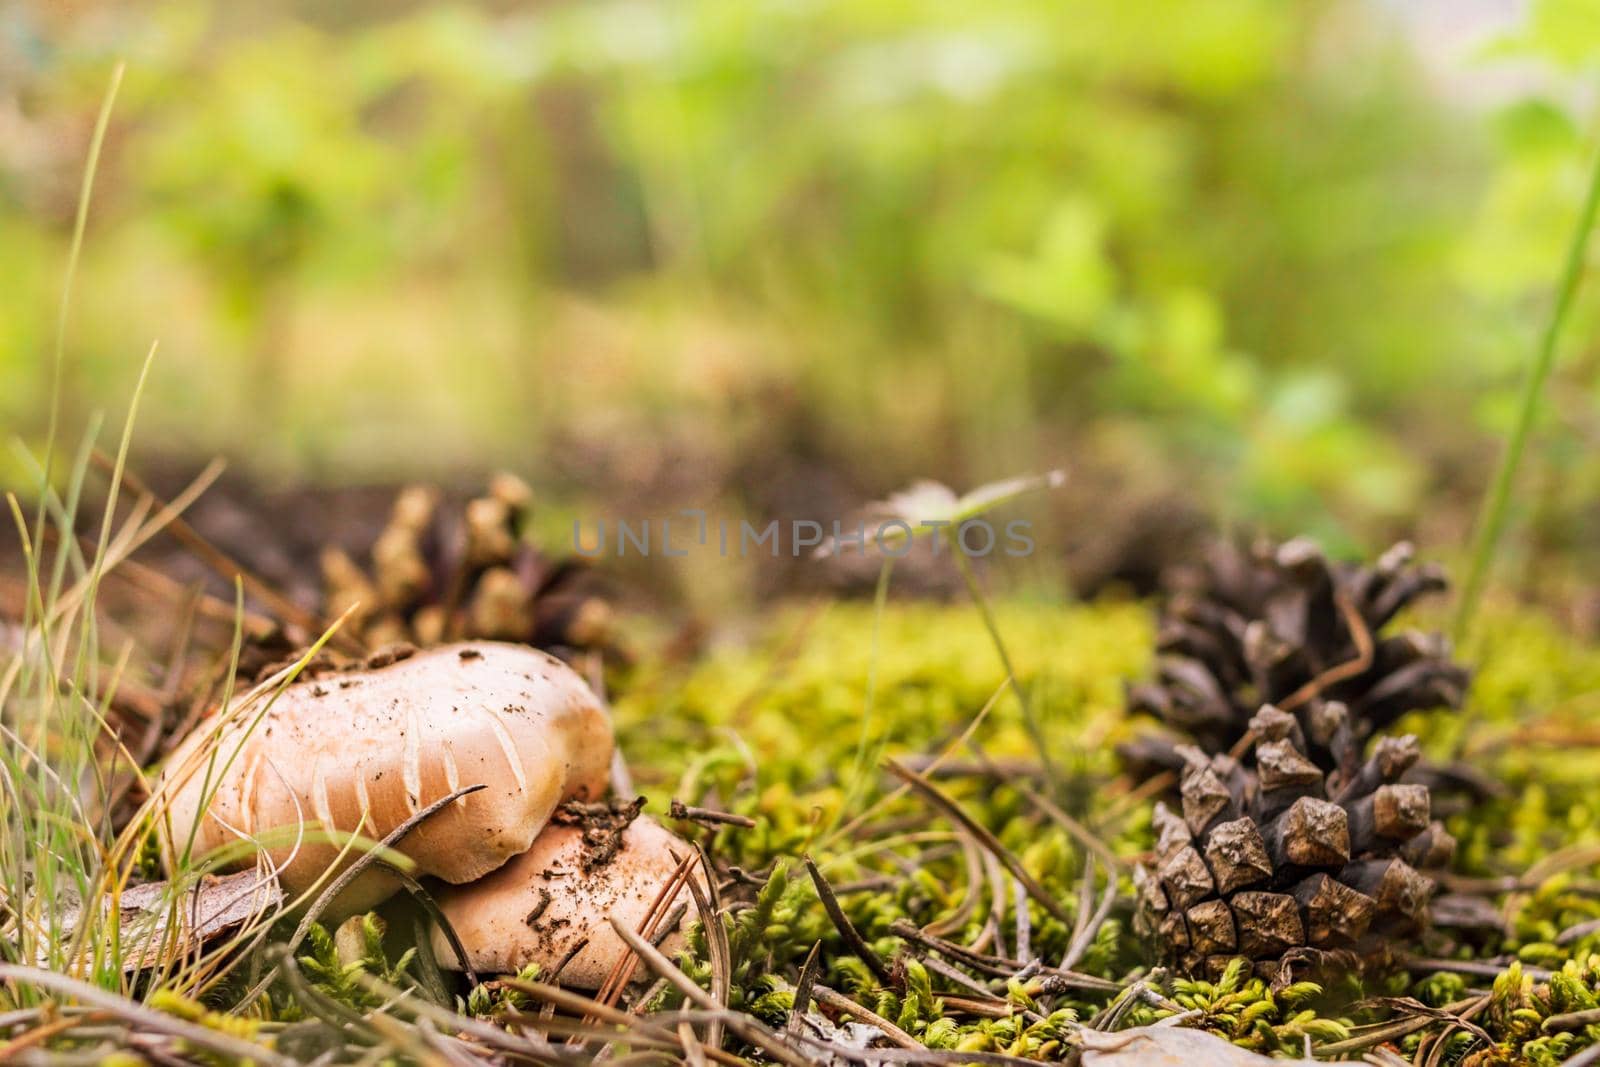 A group of mushrooms boletus grows among the moss and fallen pinecones in coniferous forest, mushroom picking season, selective focus, close up